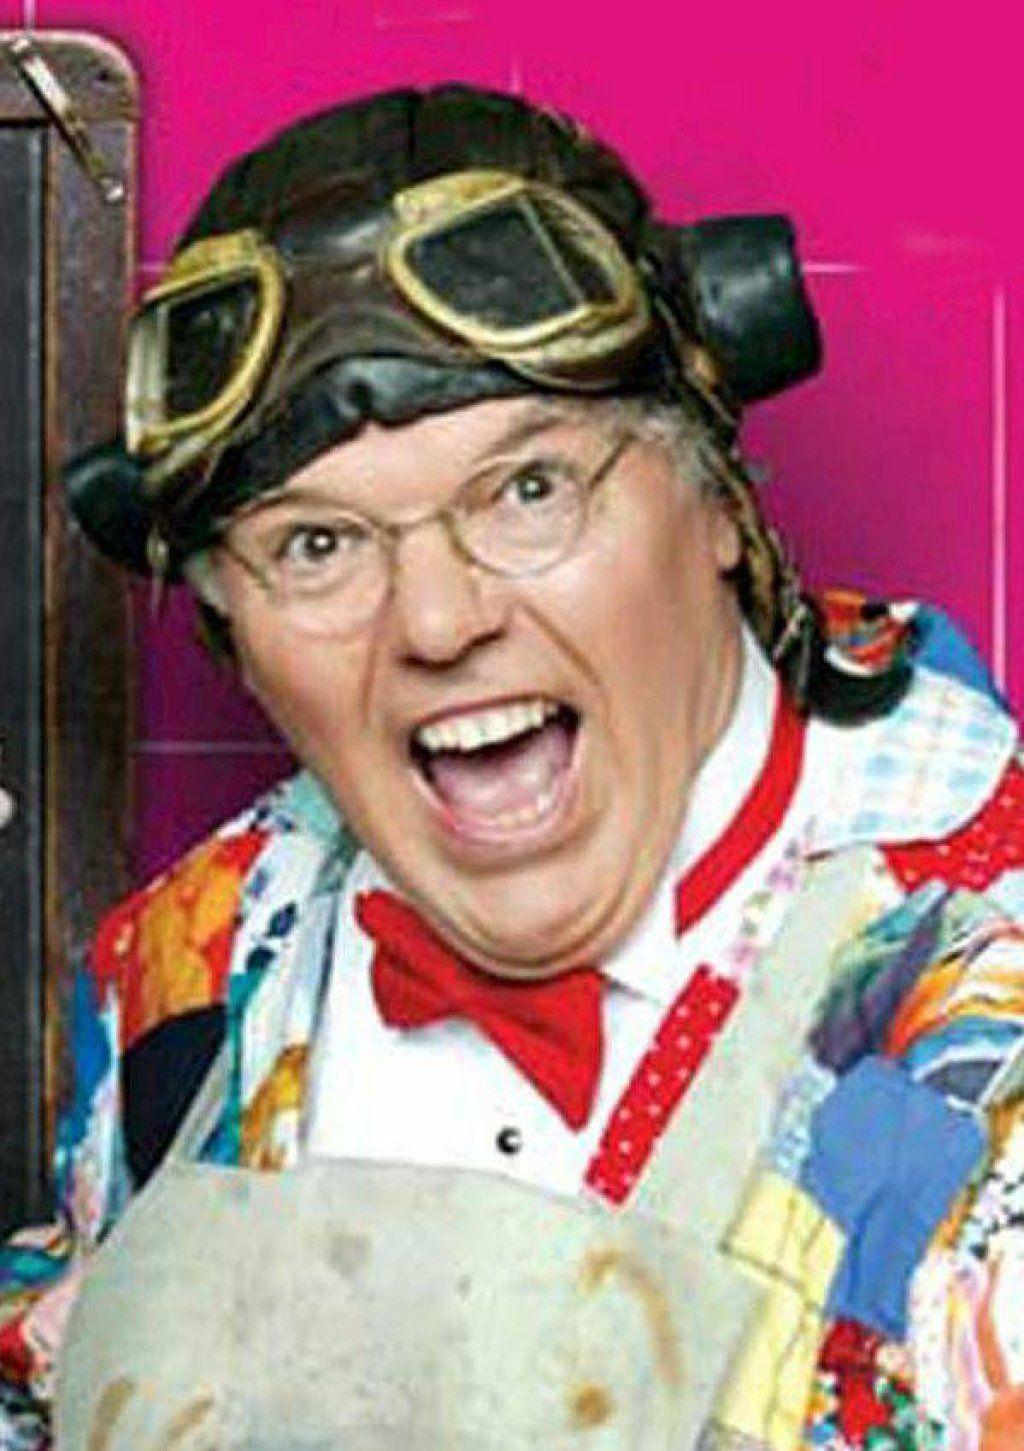 Lightning recommend best of Roy chubby brown review